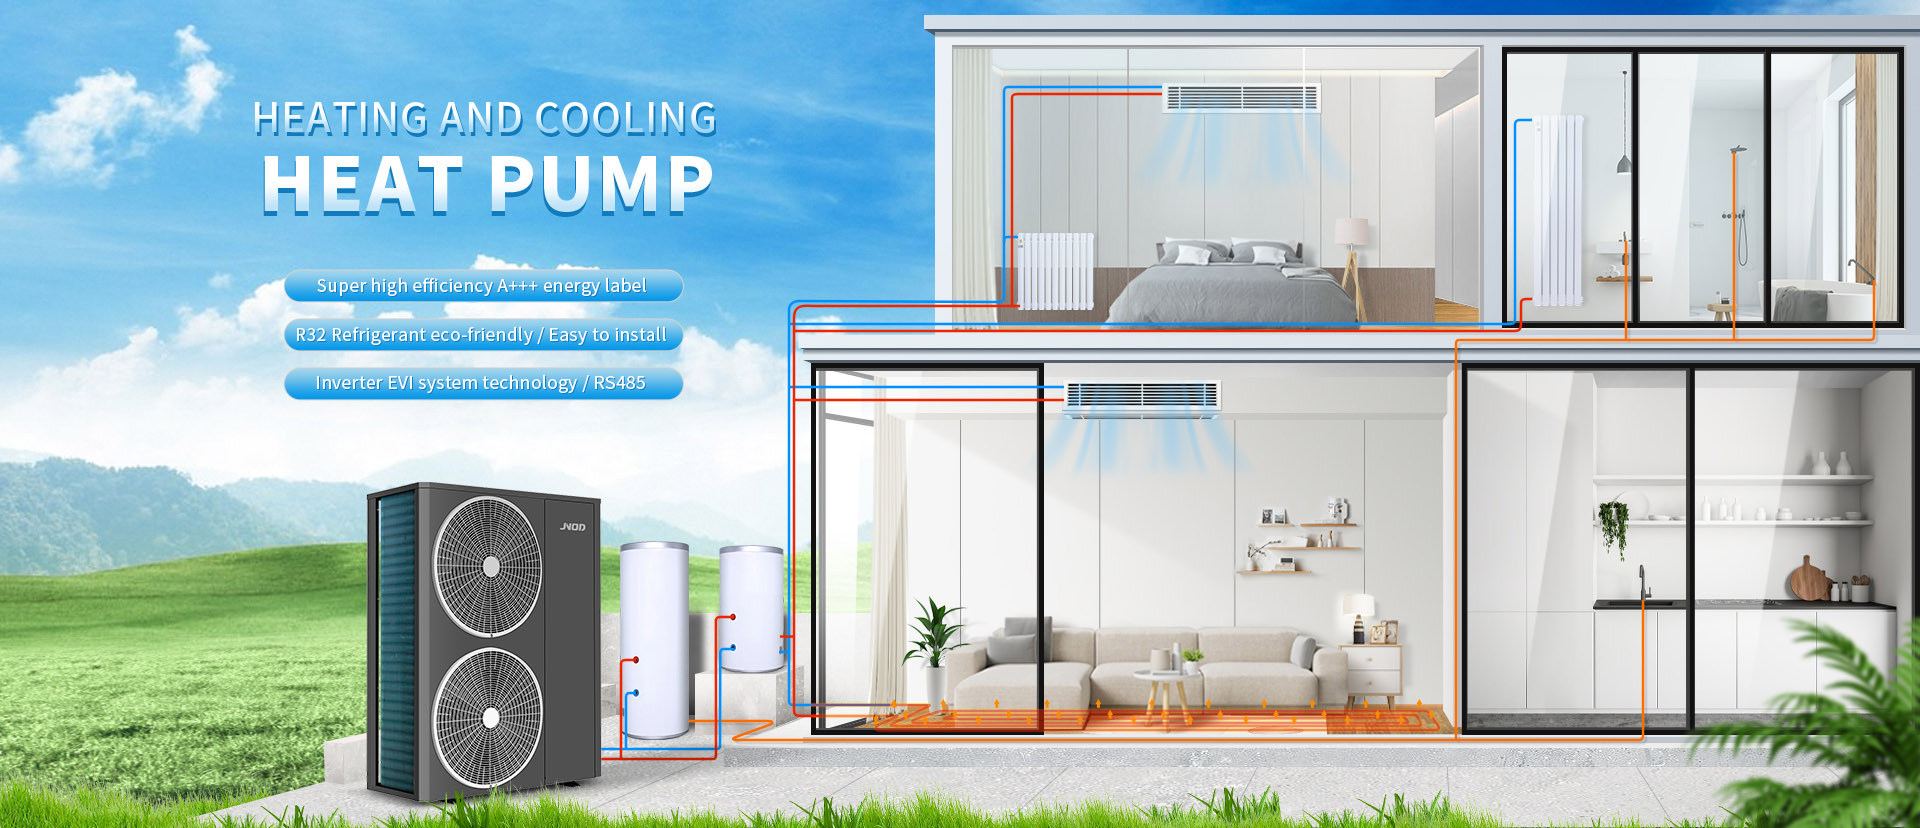 Monoblock Central Heating And Cooling Heat Pump